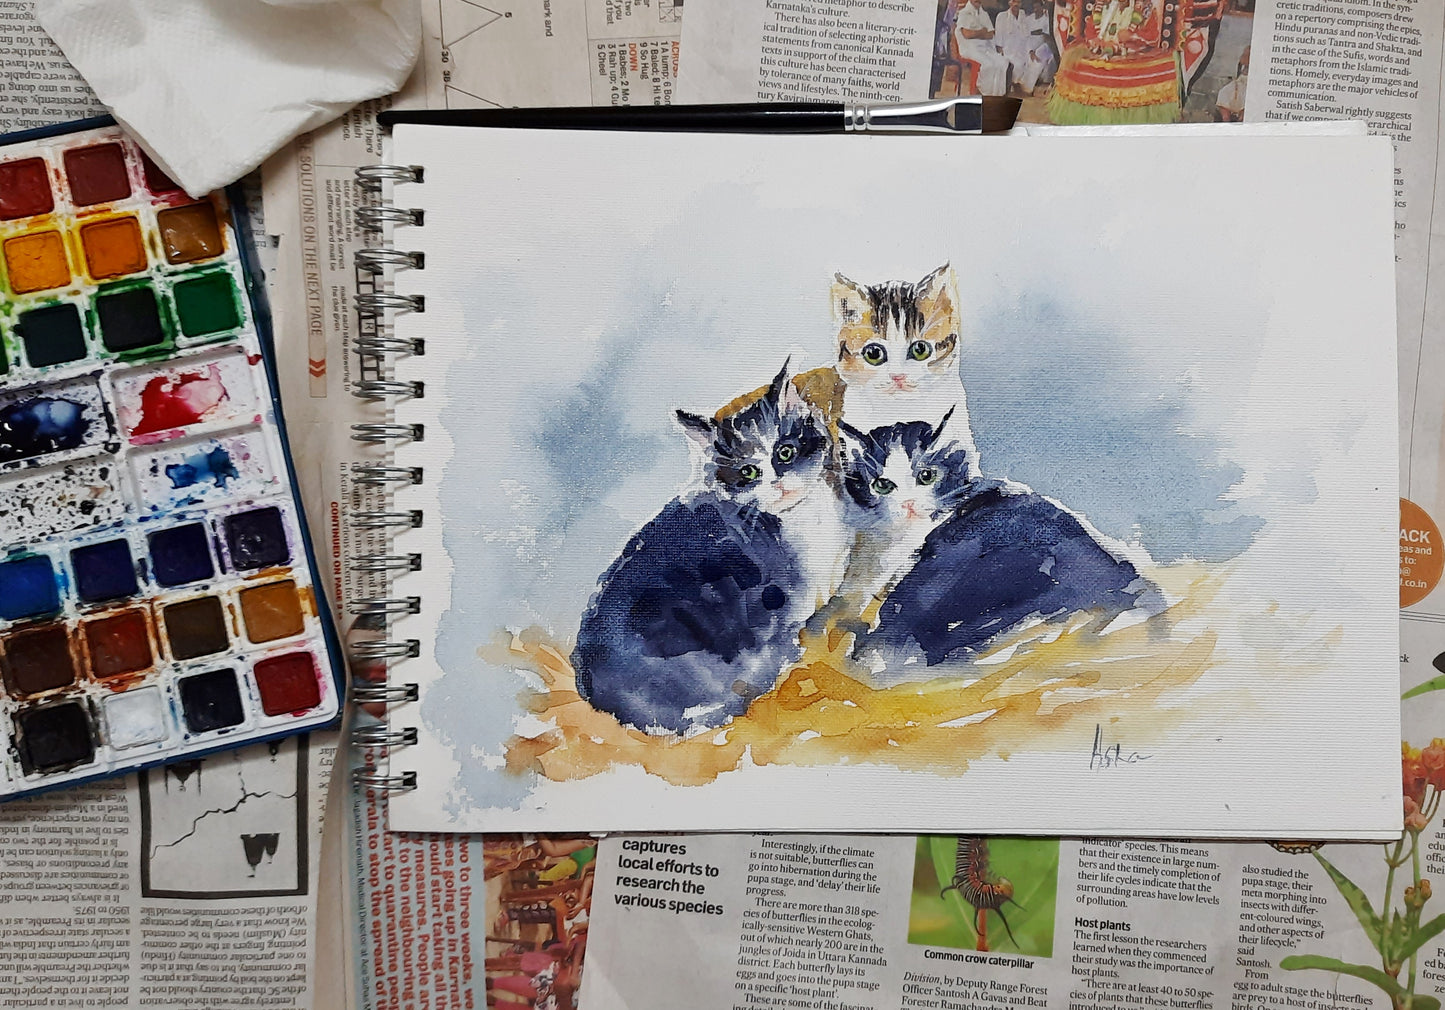 Three Little Kittens, watercolor painting on paper